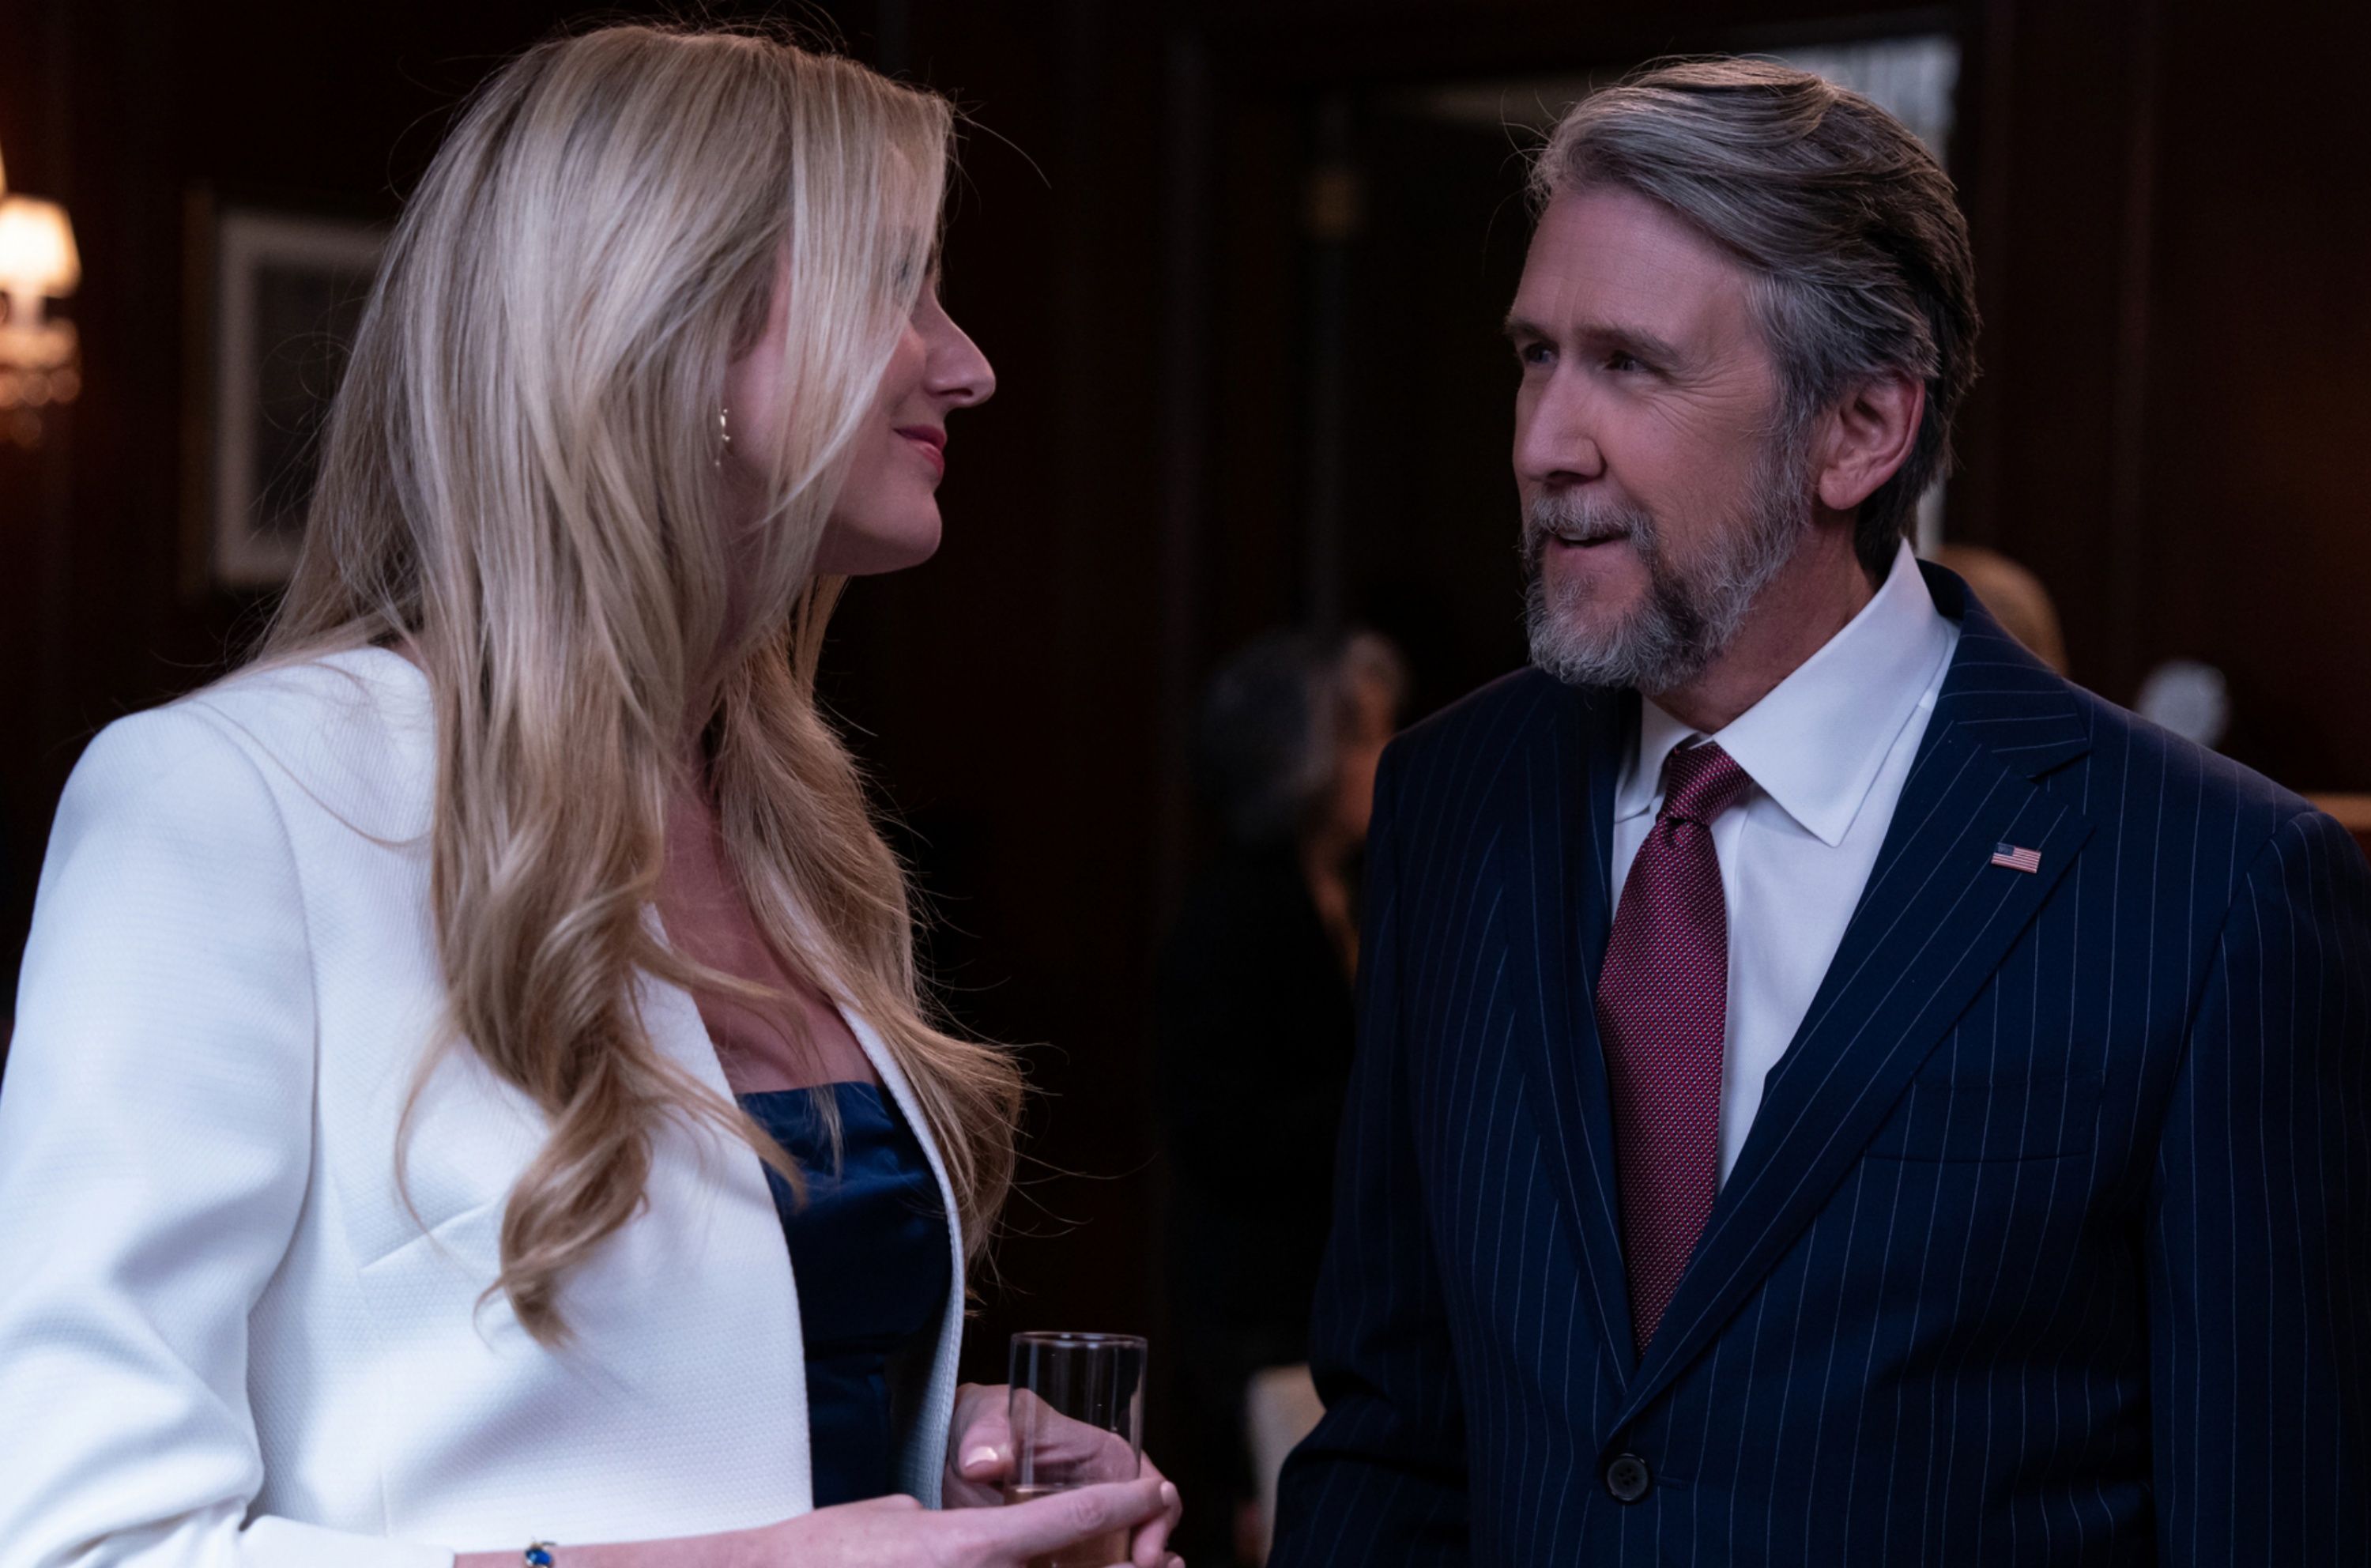 Alan Ruck as Connor Roy and Justine Lupe as Connor's fiance Willa in Season 4 of Succession